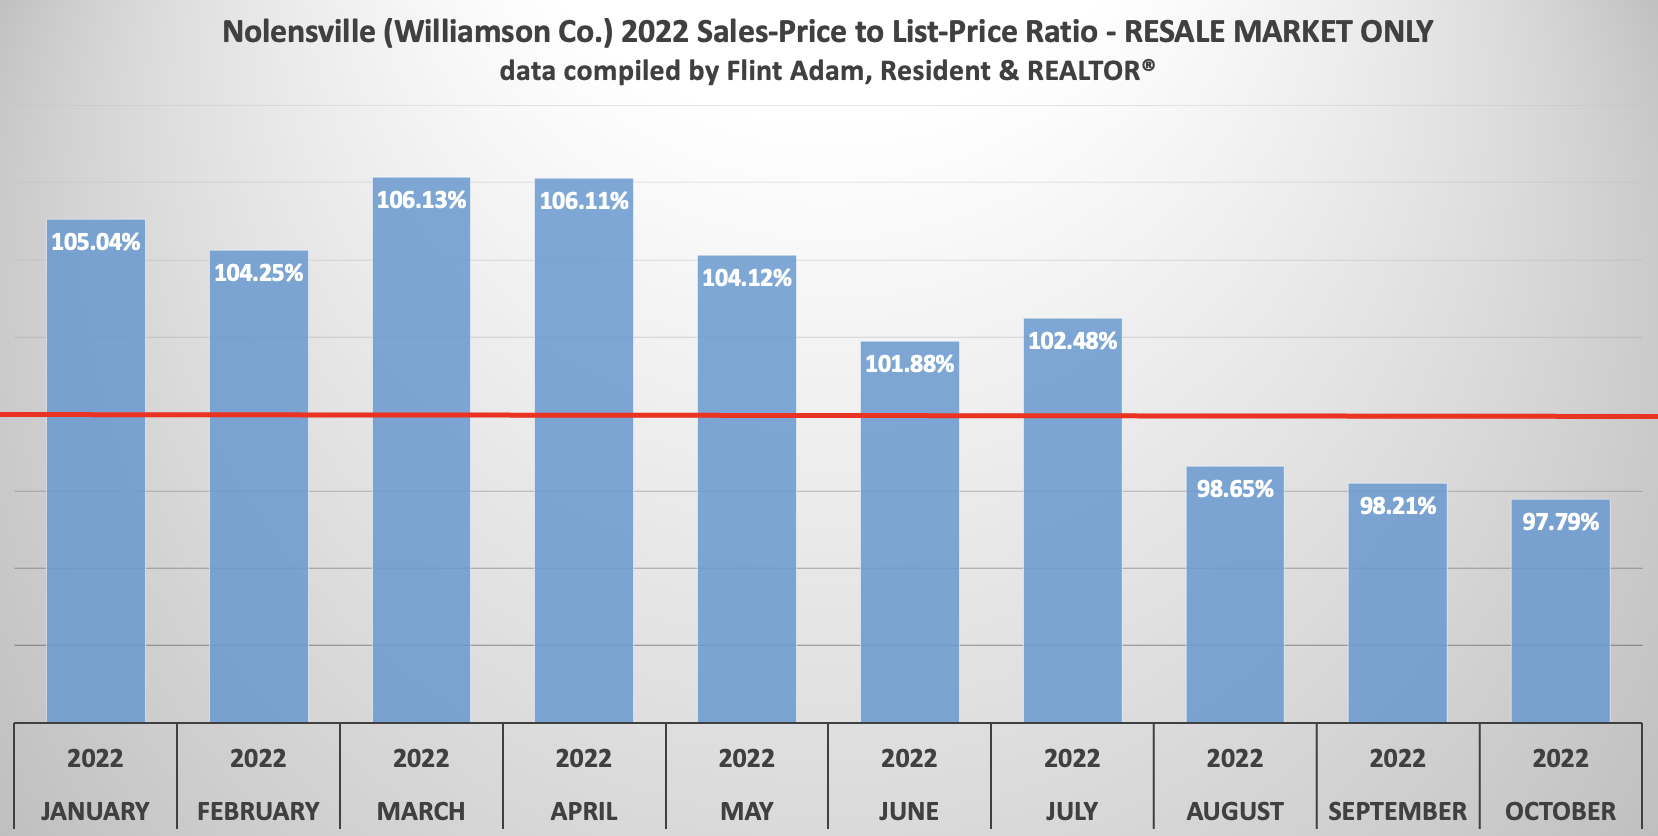 Nolensville TN (Williamson Co.) Sales Price to List Price Ratios for the Existing Homes Market - January through October 2022